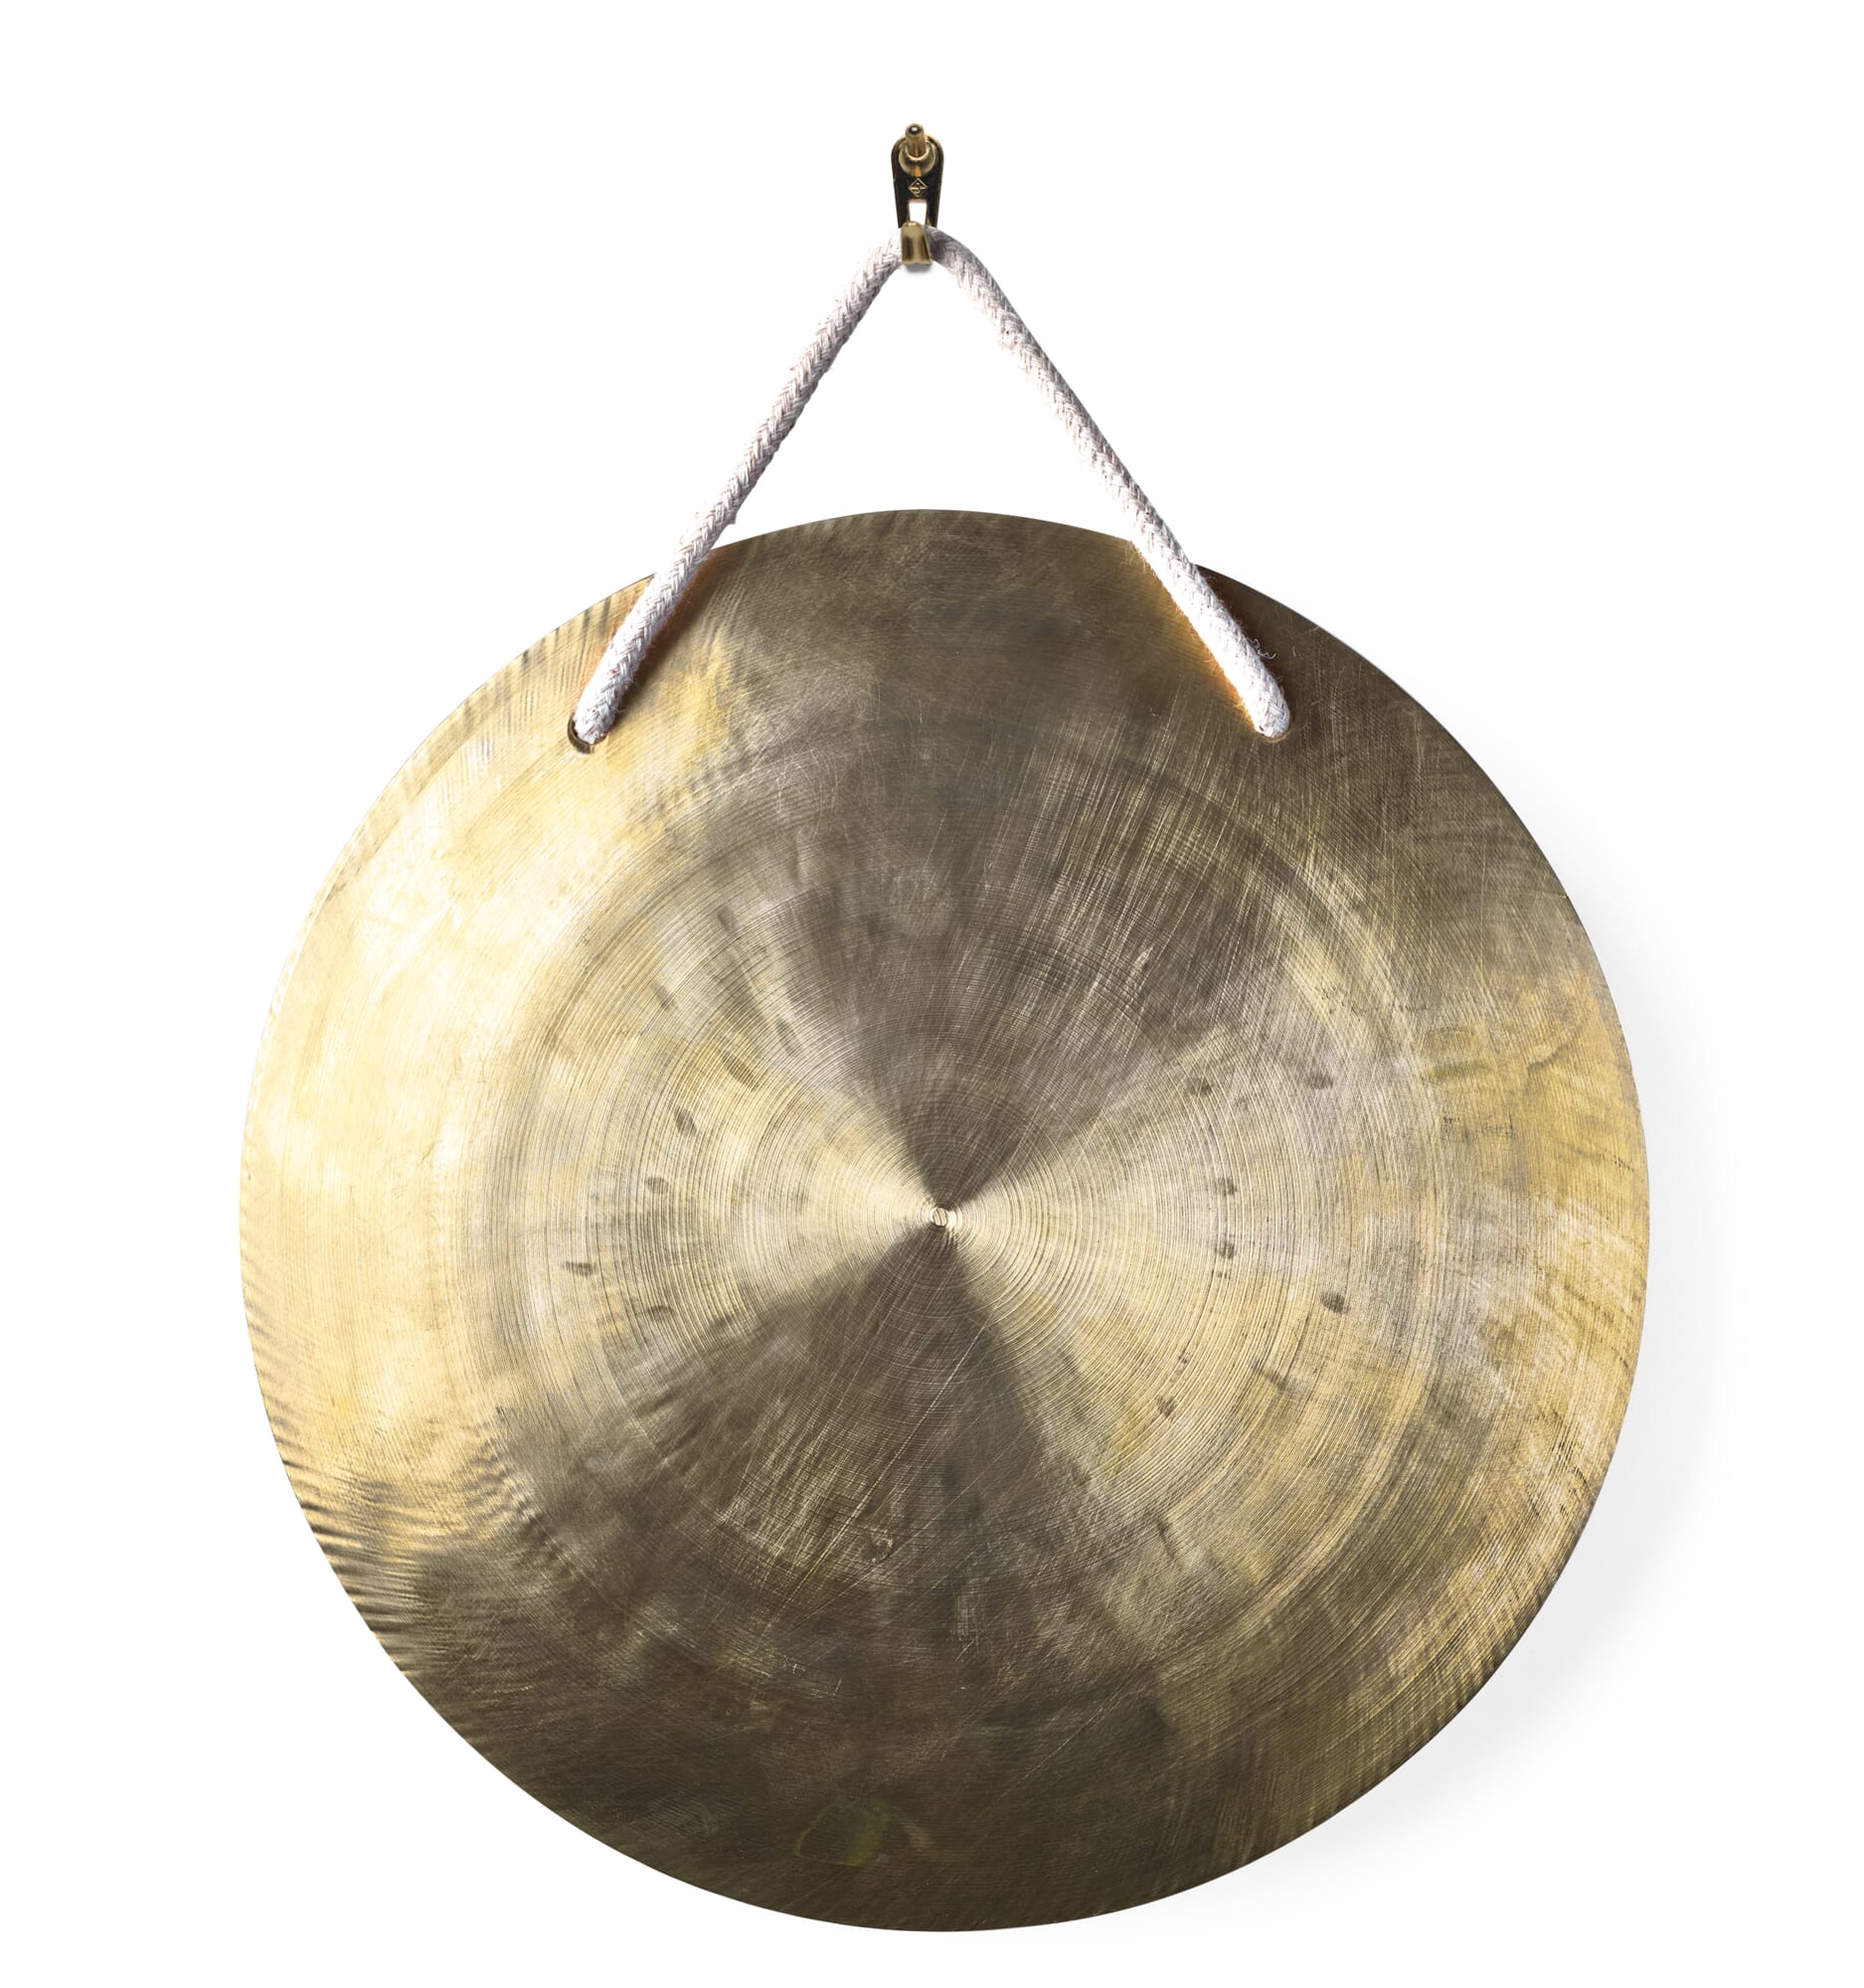 Chinese gong